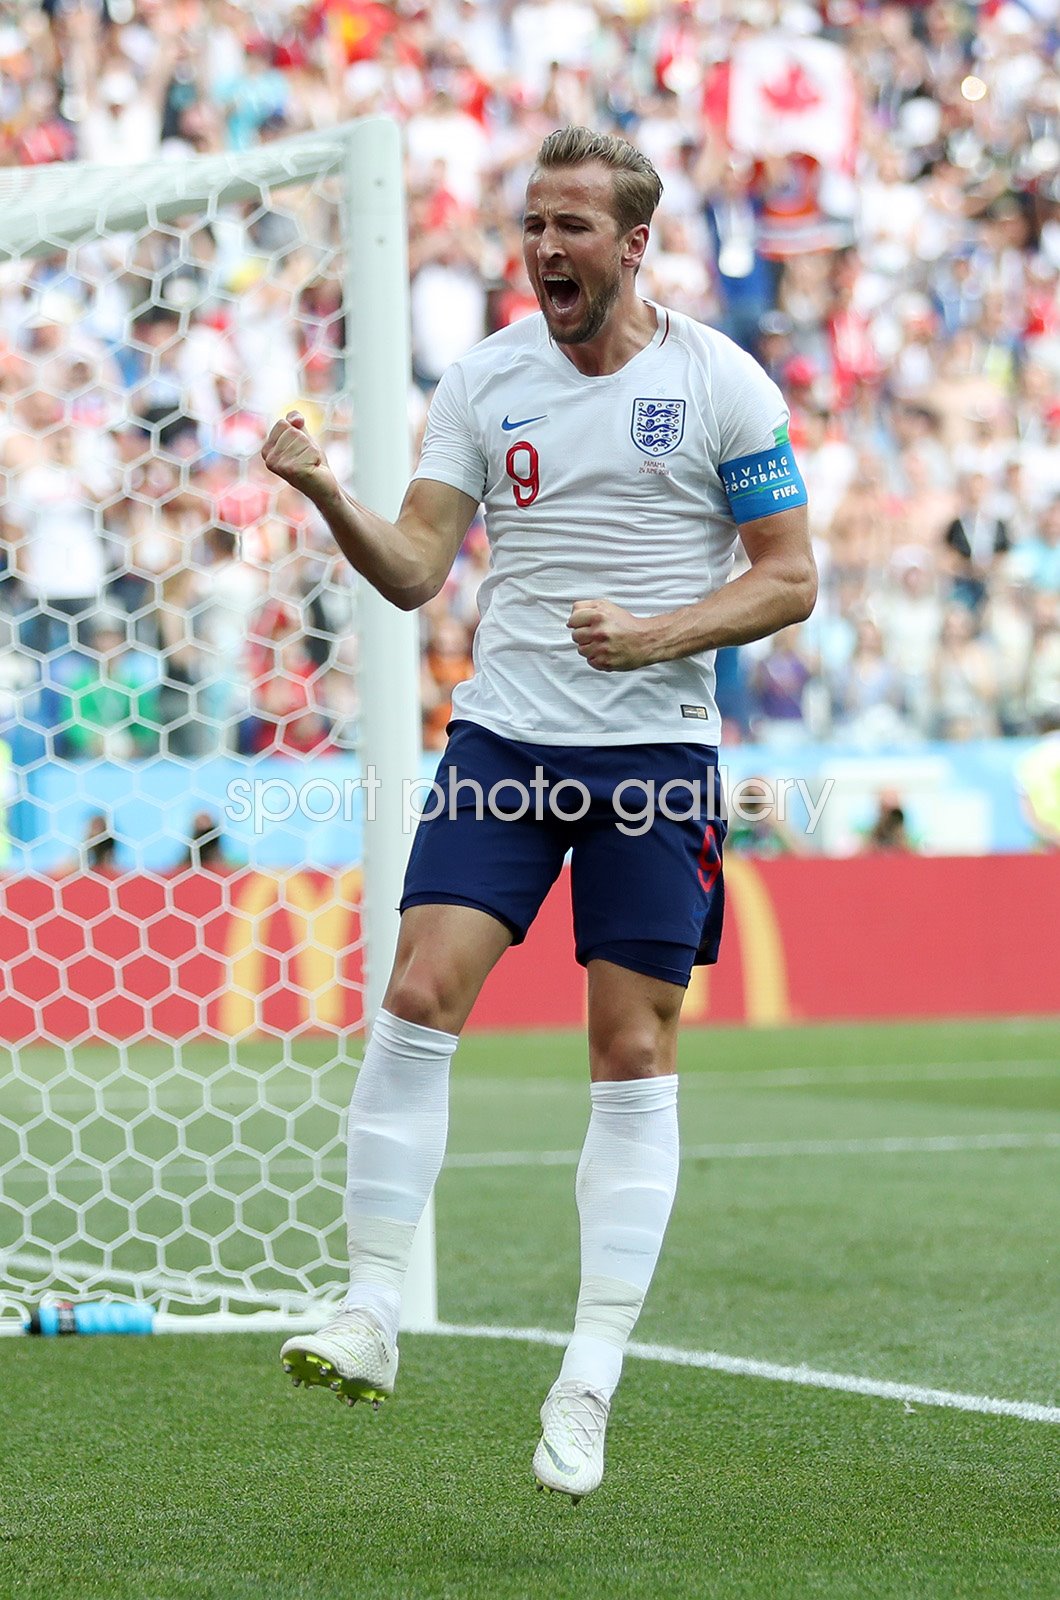 Harry Kane England penalty v Panama World Cup 2018 Images | Football Posters